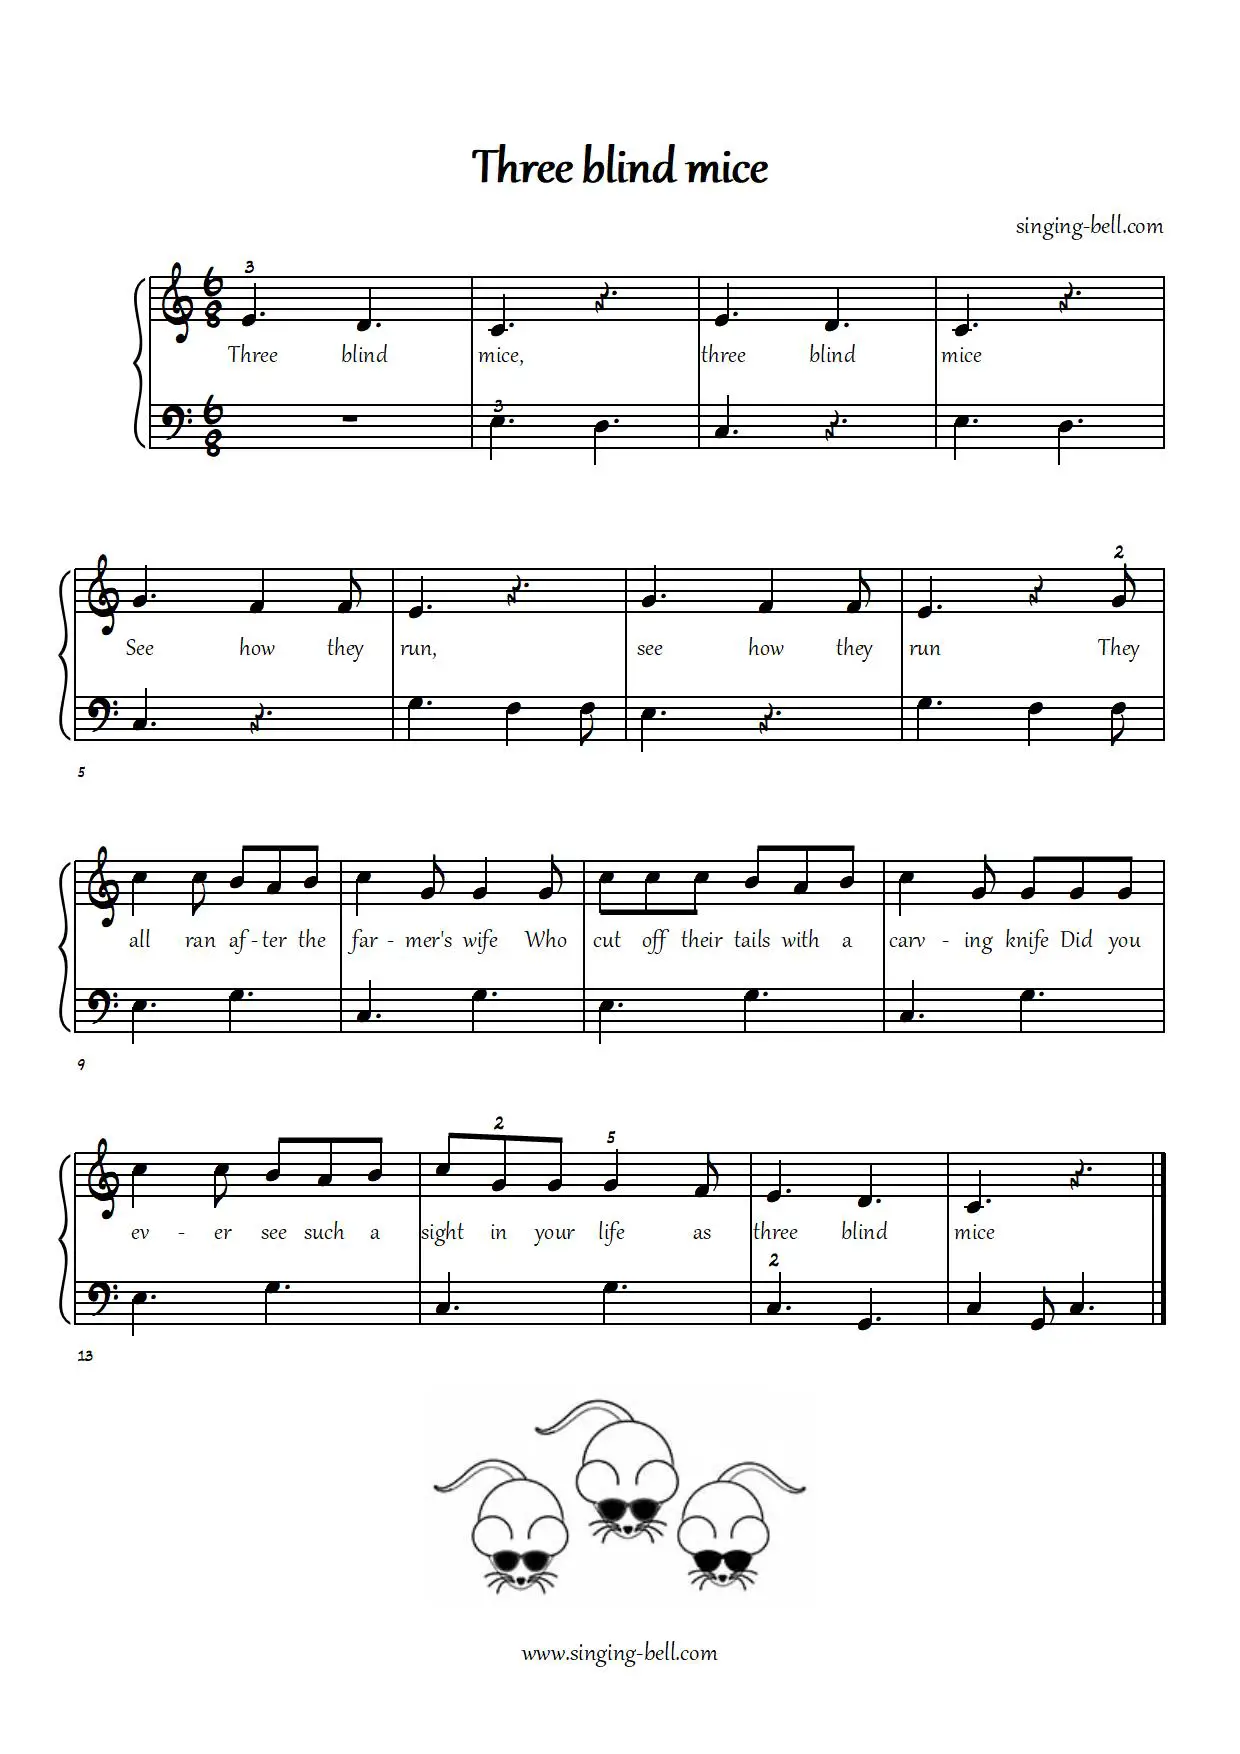 Three Blind Mice easy piano sheet music notes chords beginners pdf